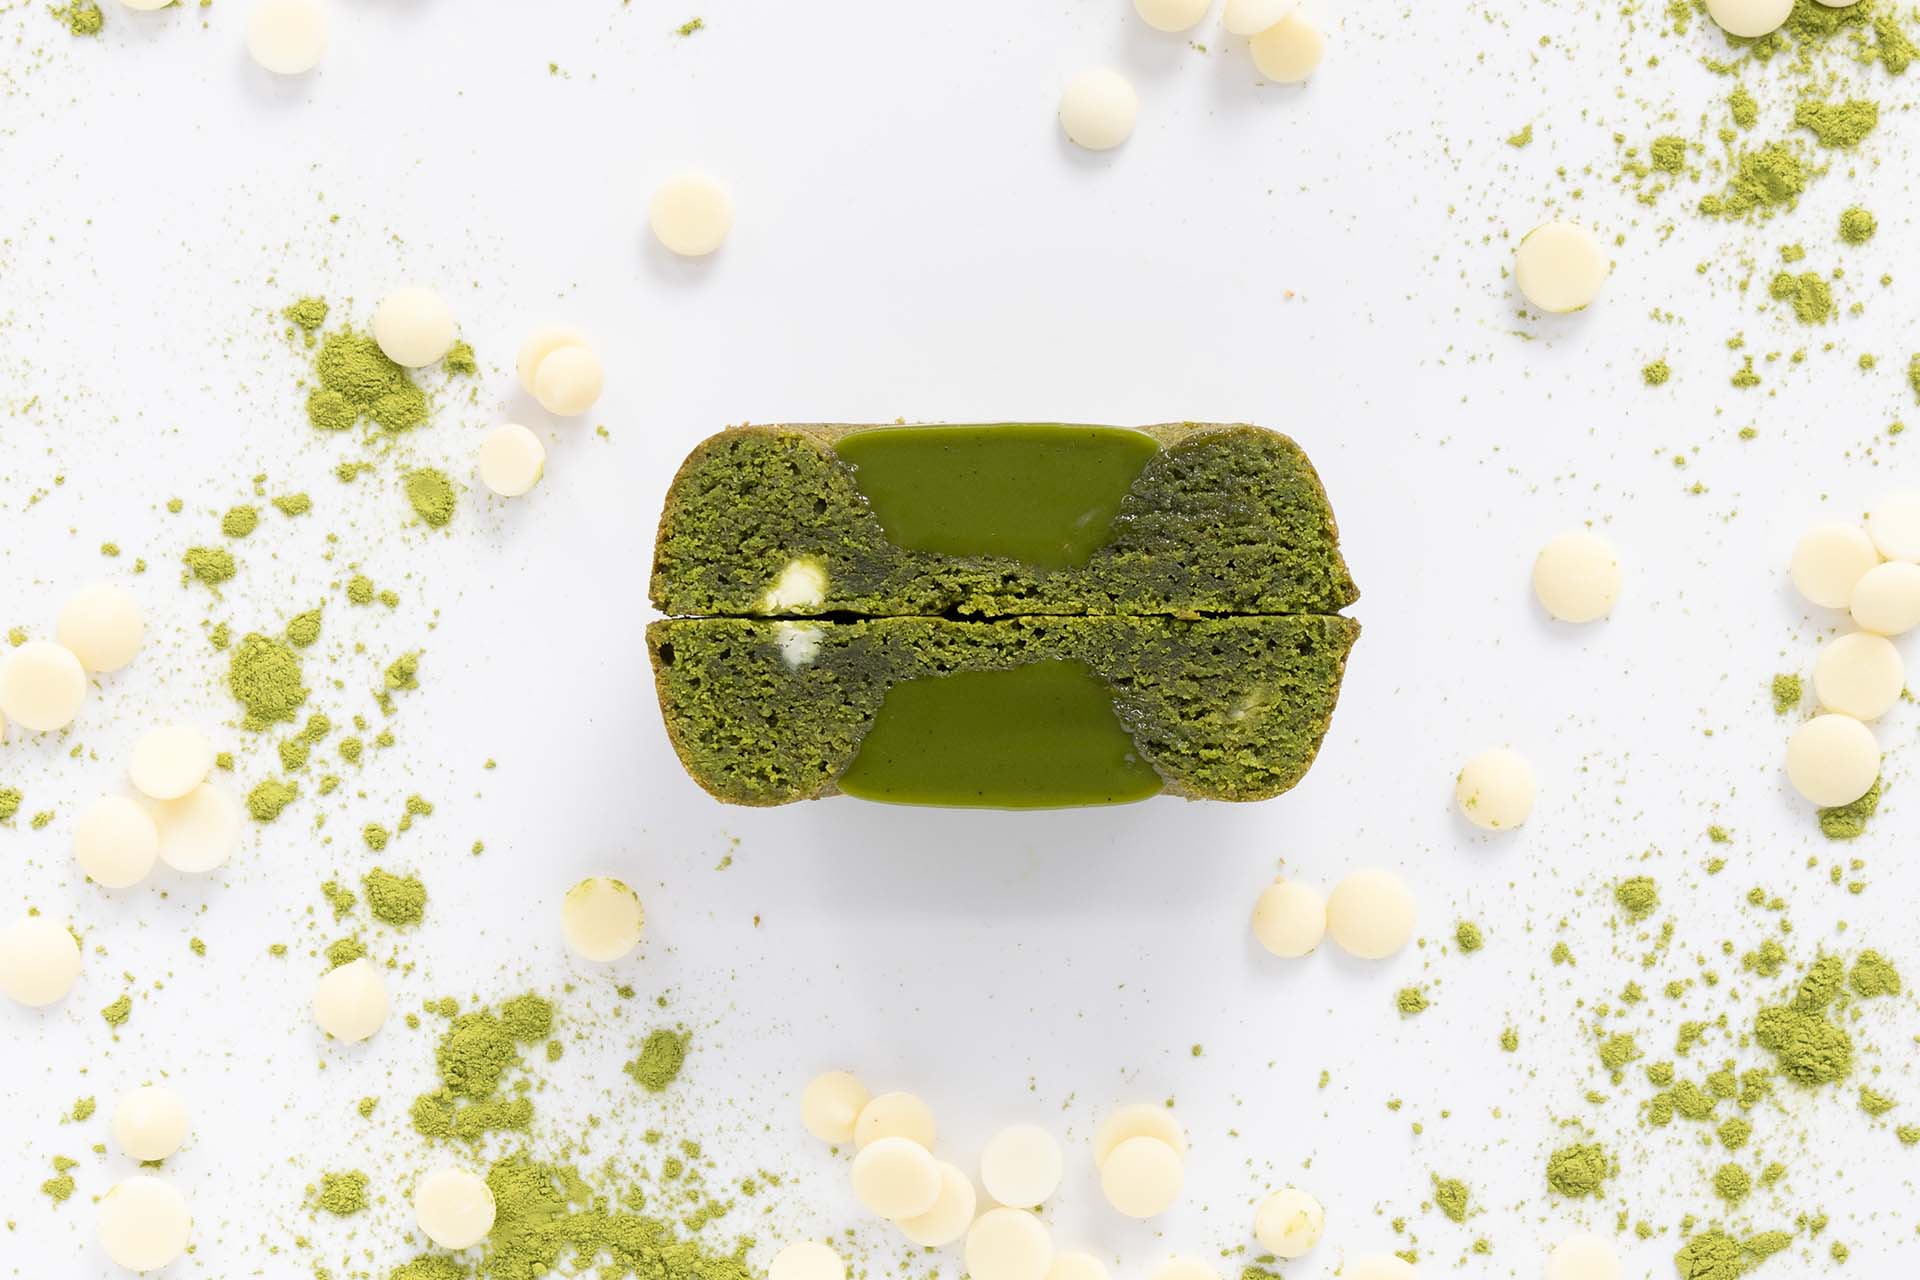 Matcha flavored dessert with white chocolate chips and espresso powder garnish on a white background.